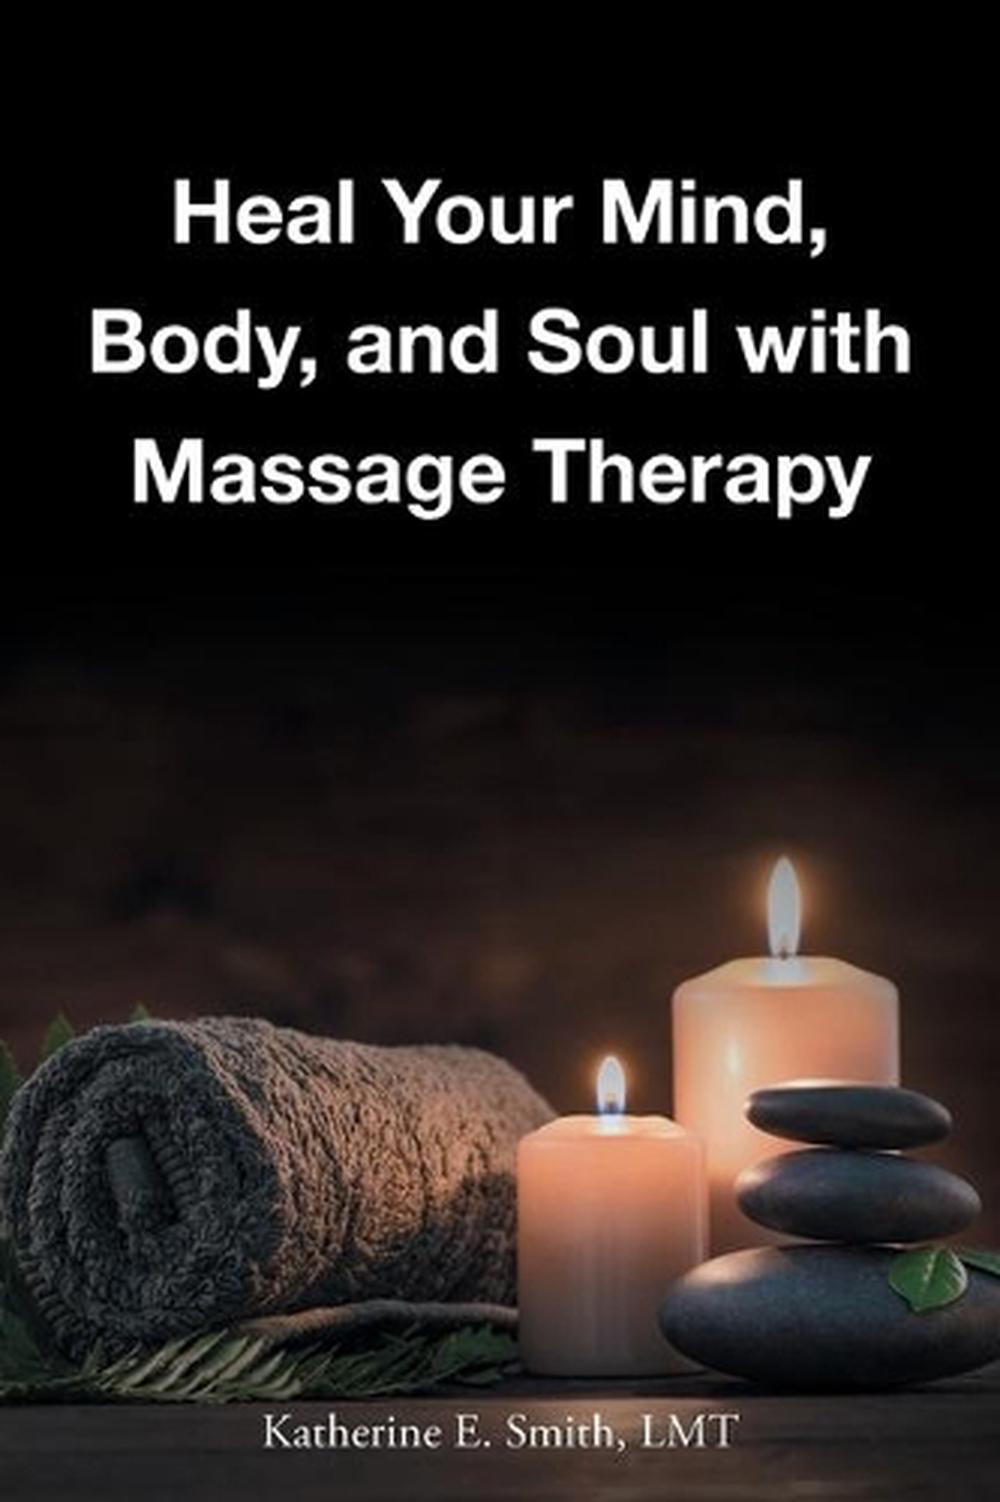 Heal Your Mind Body And Soul With Massage By Katherine E Smith Lmt